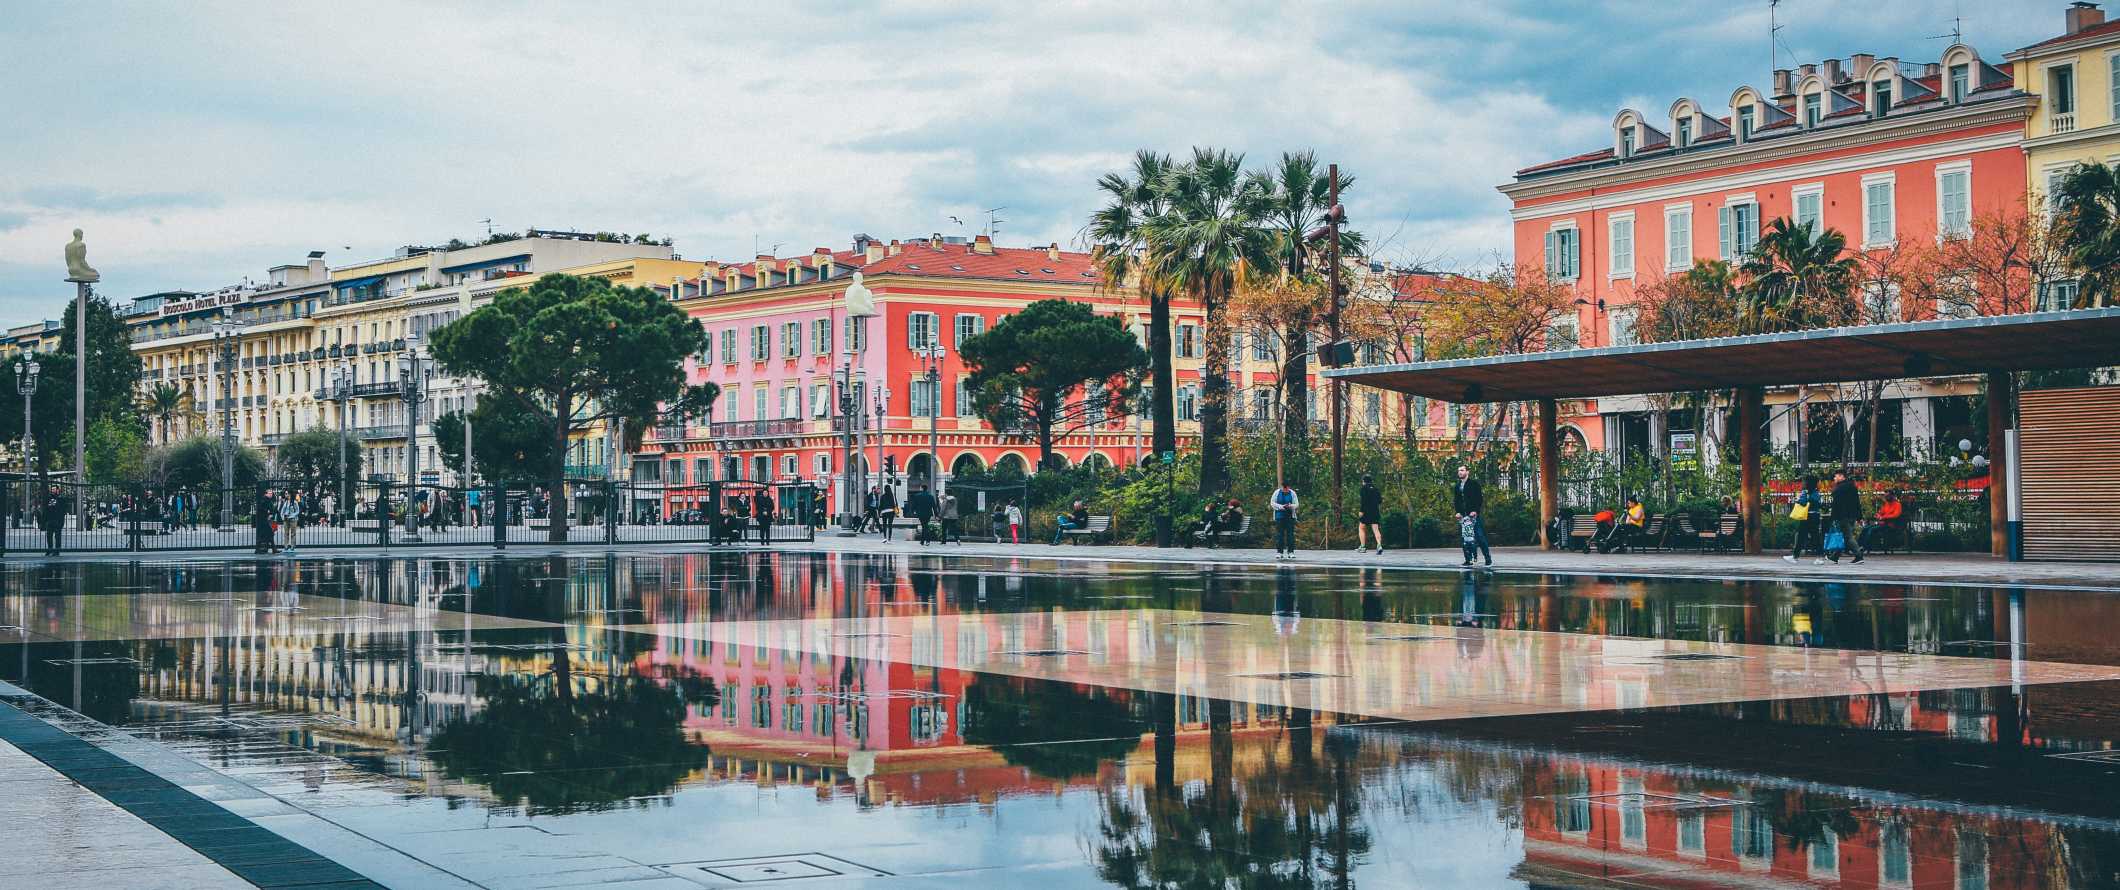 A wide fountain and reflecting pool with the colorful buildings of Nice, France in the background on a dreary day